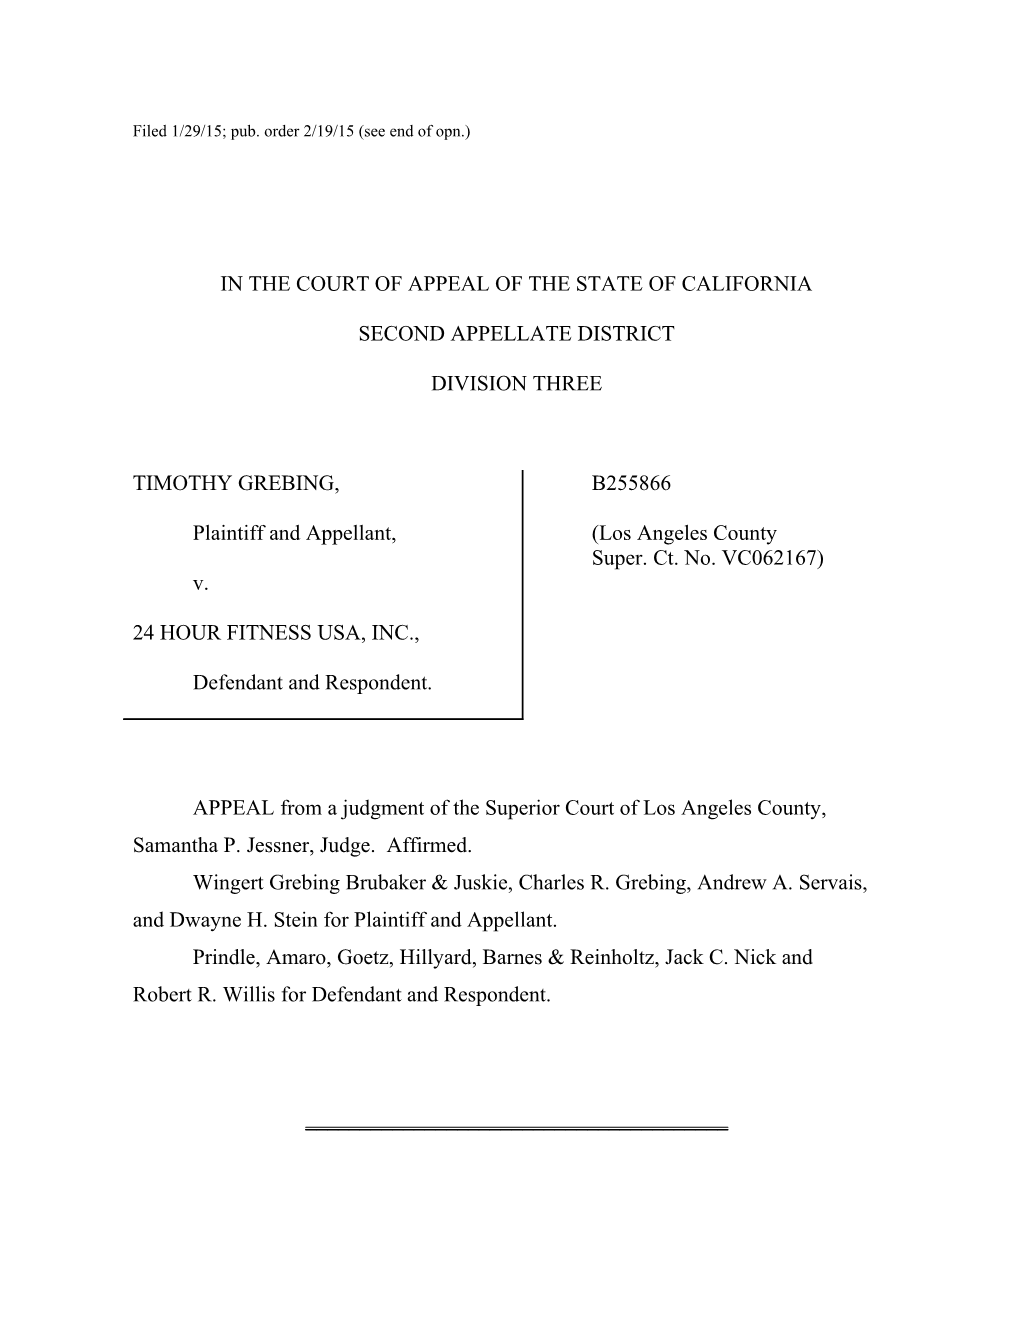 Filed 1/29/15; Pub. Order 2/19/15 (See End of Opn.)